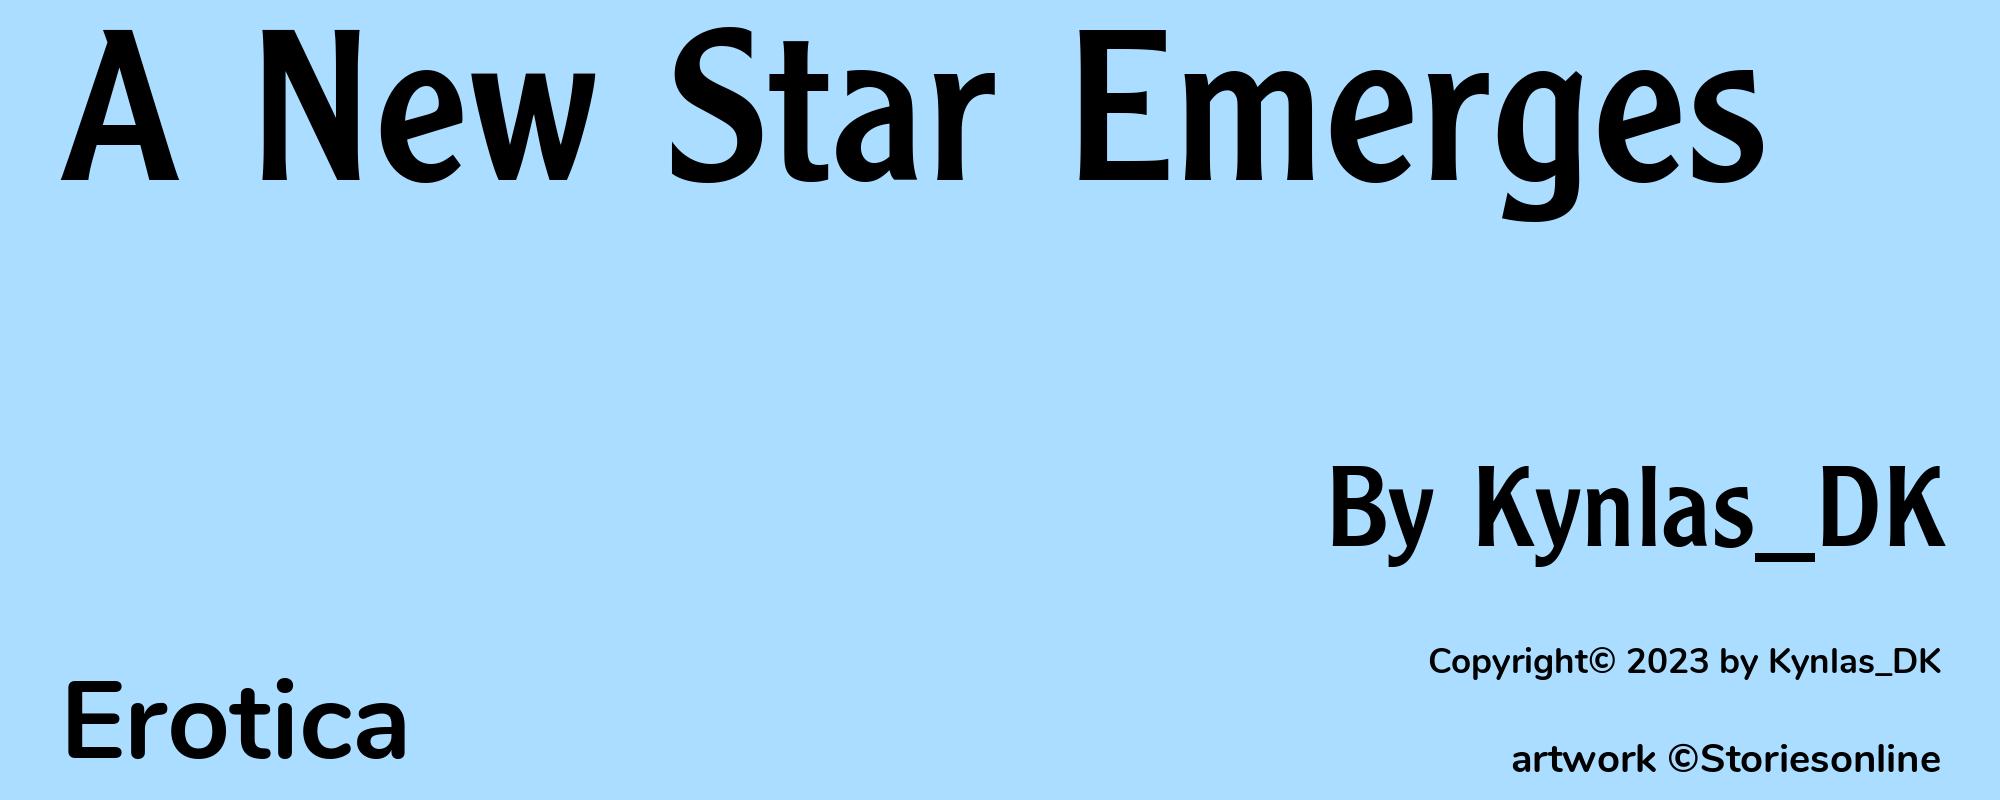 A New Star Emerges - Cover